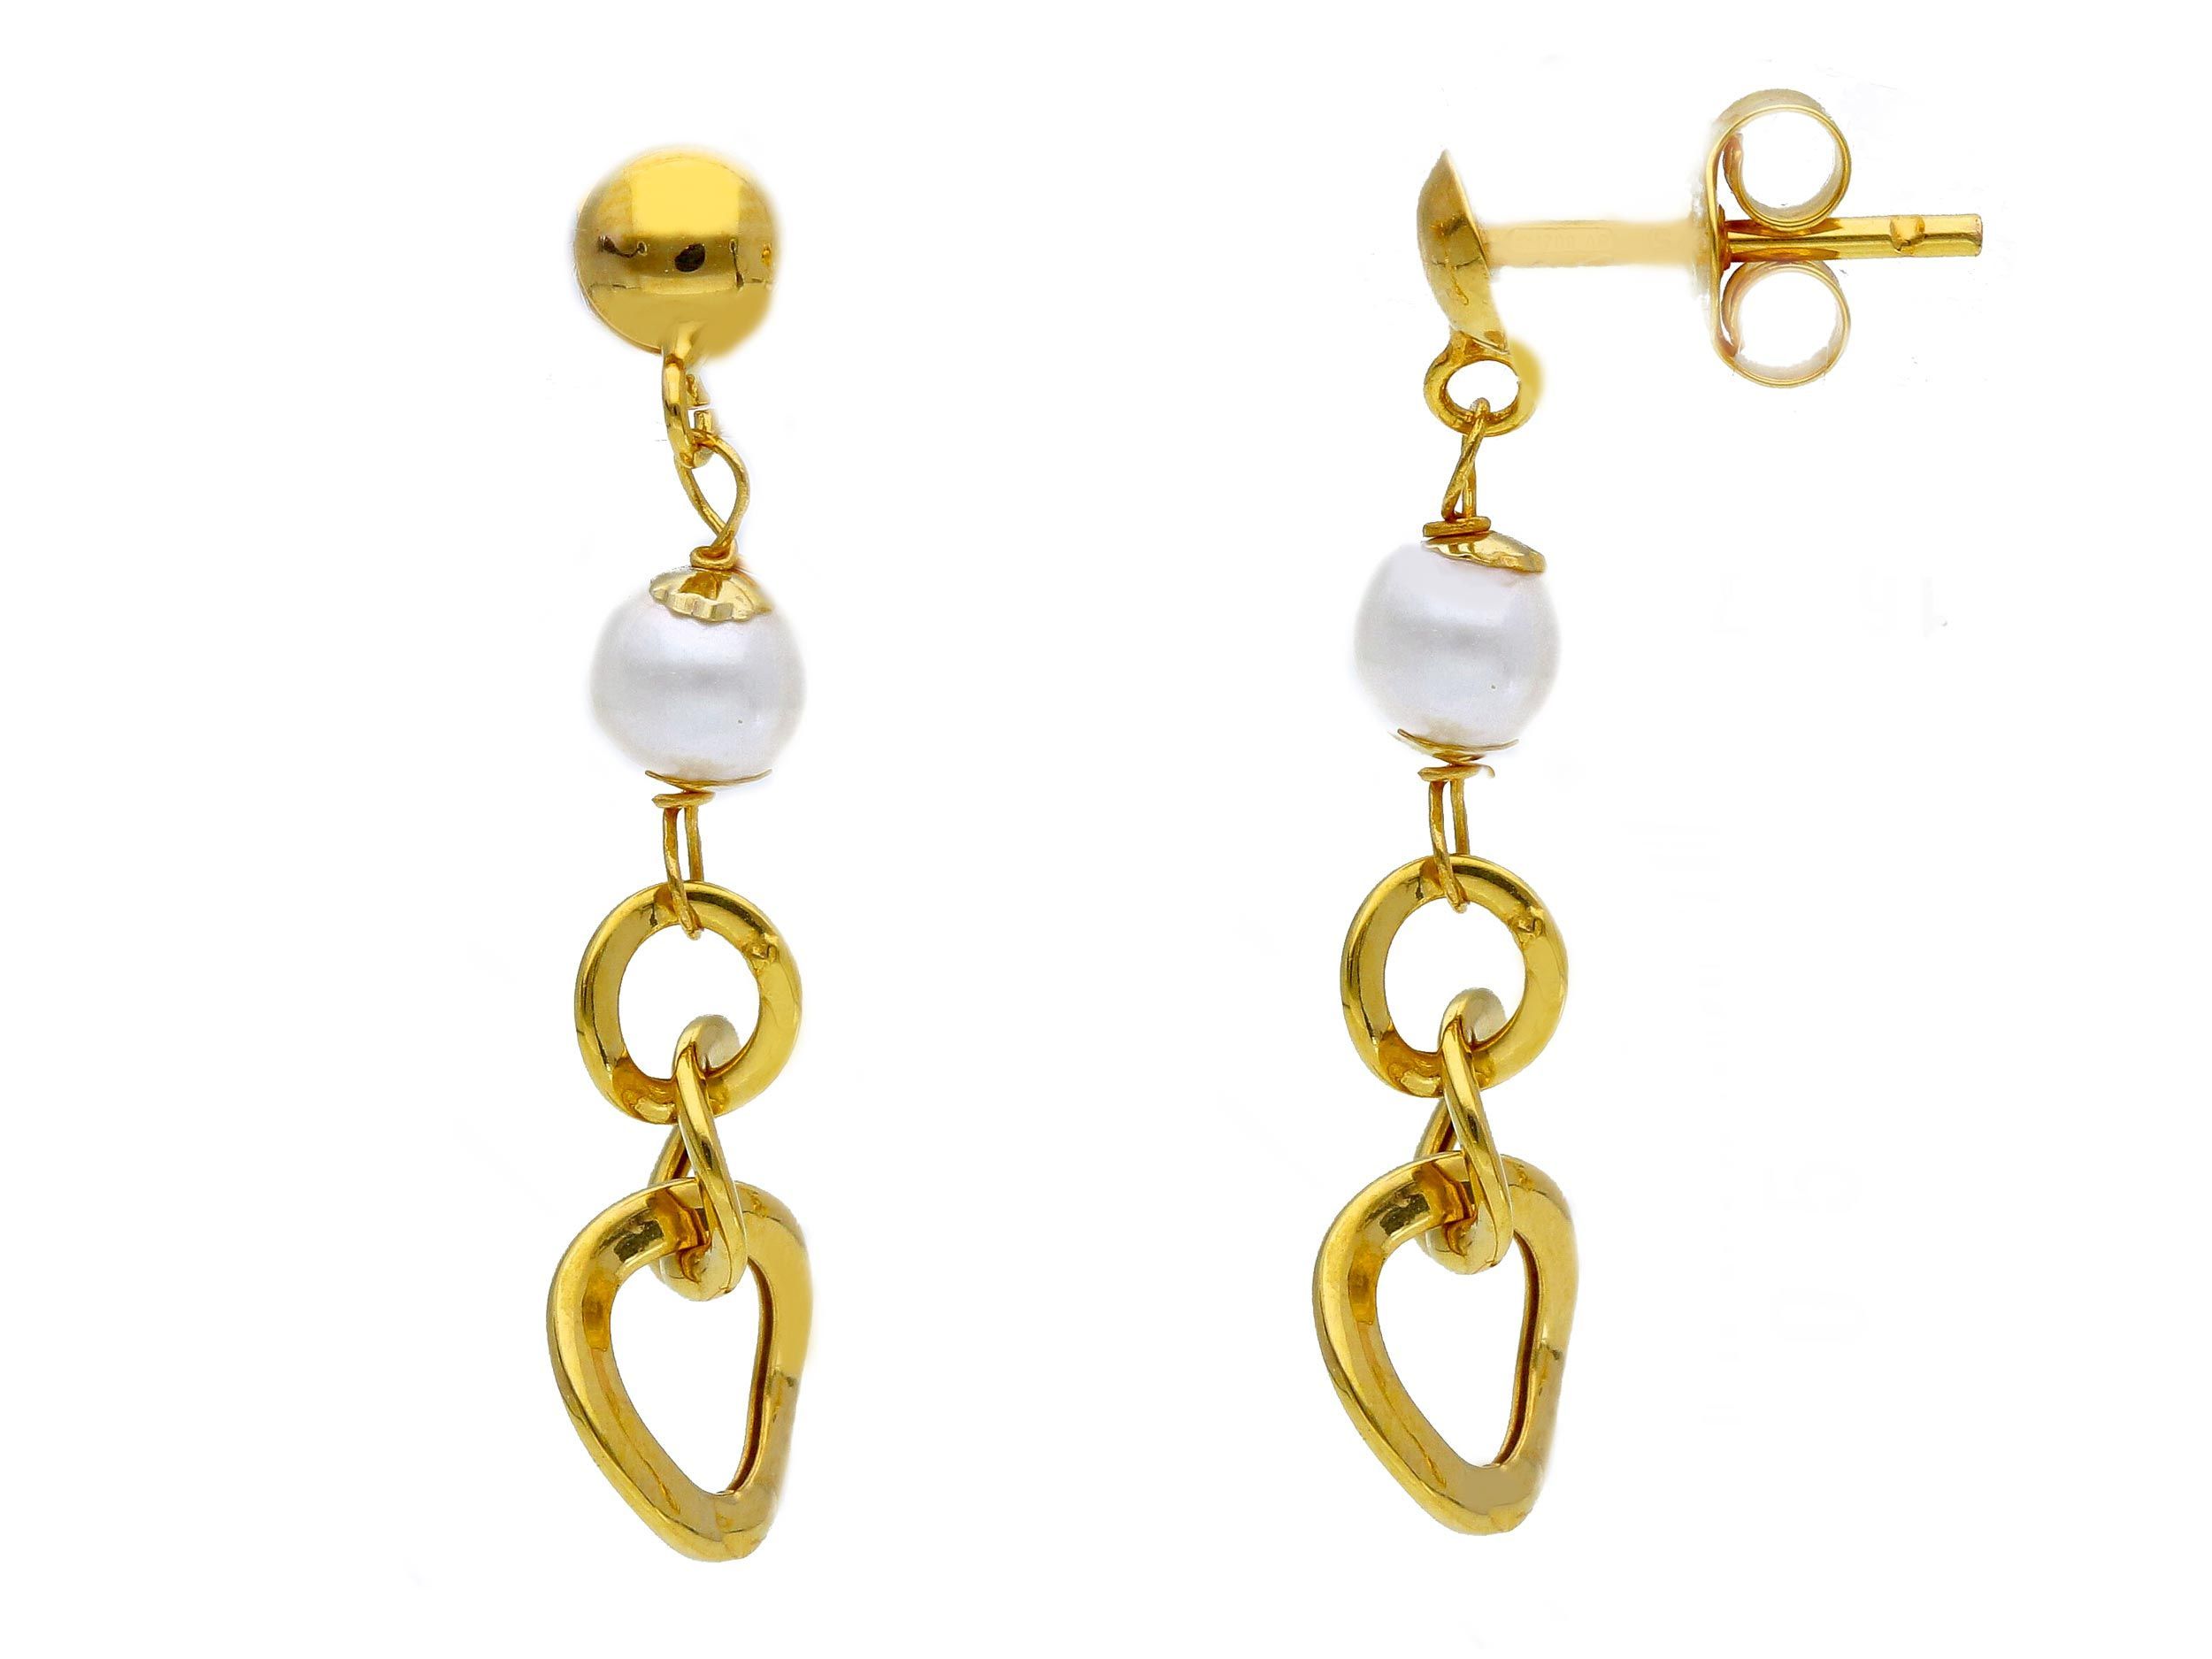 Golden earrings 9k with pearls (code S202521)